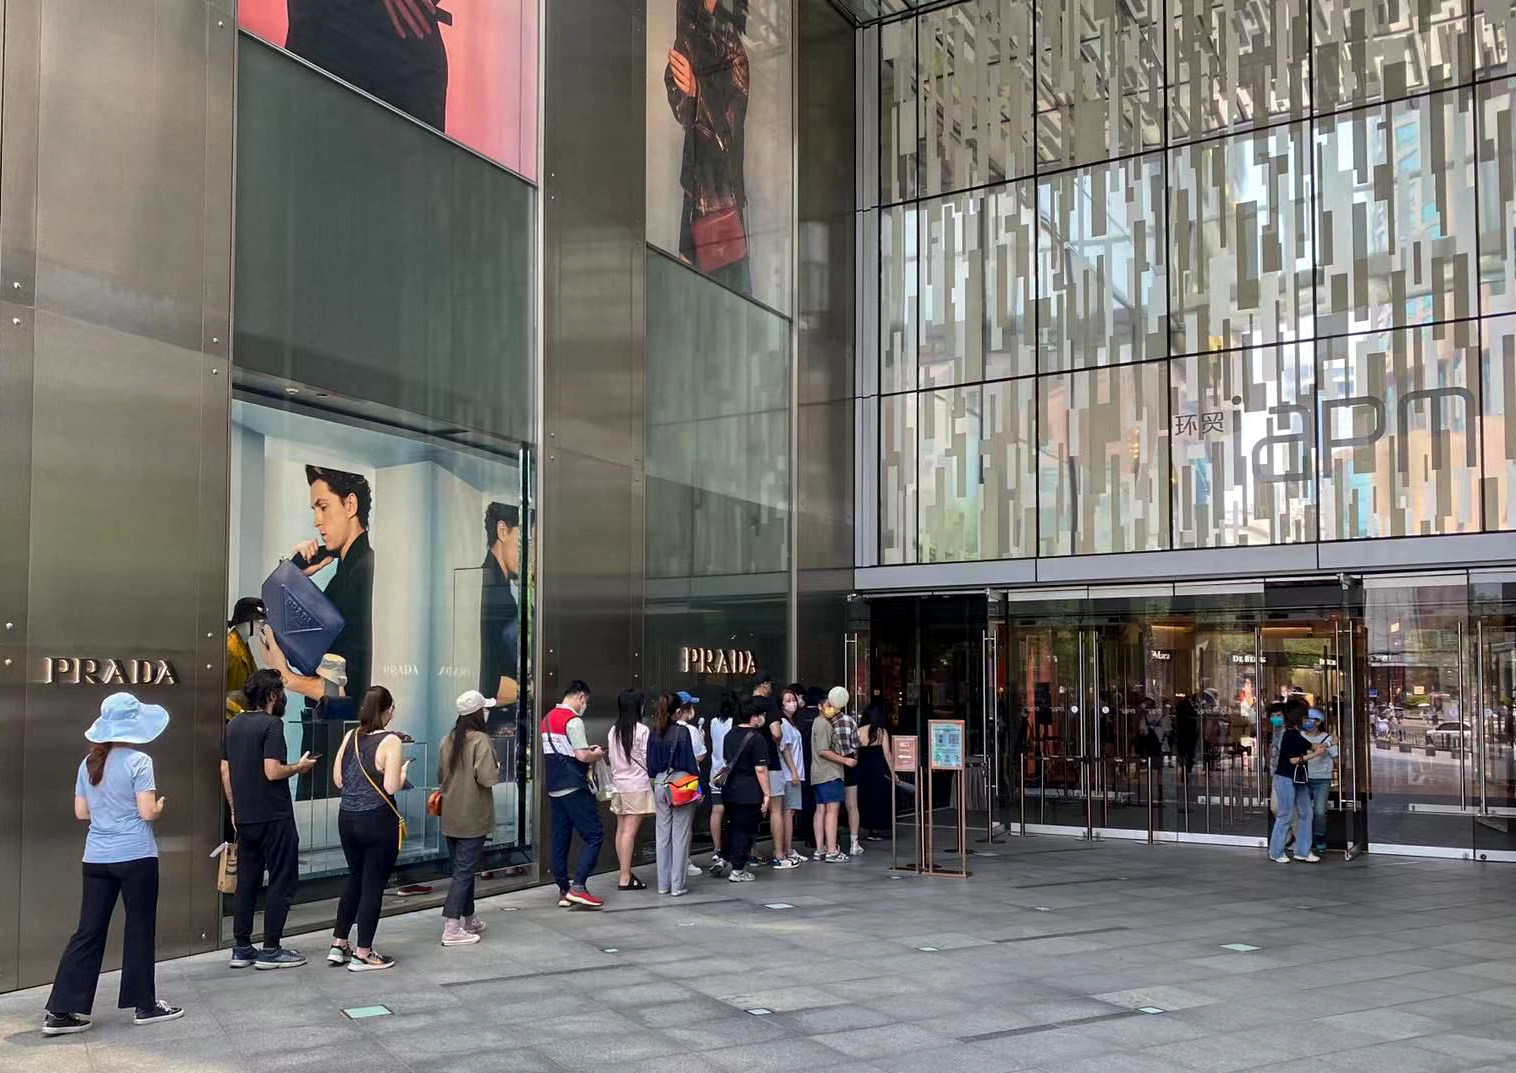 Shanghai residents are seen lining up outside a luxury boutique at Sun Hung Kai Properties’ Shanghai IFC Mall on June 1, 2022, as the city reopens after a two-month lockdown. Photo: Handout